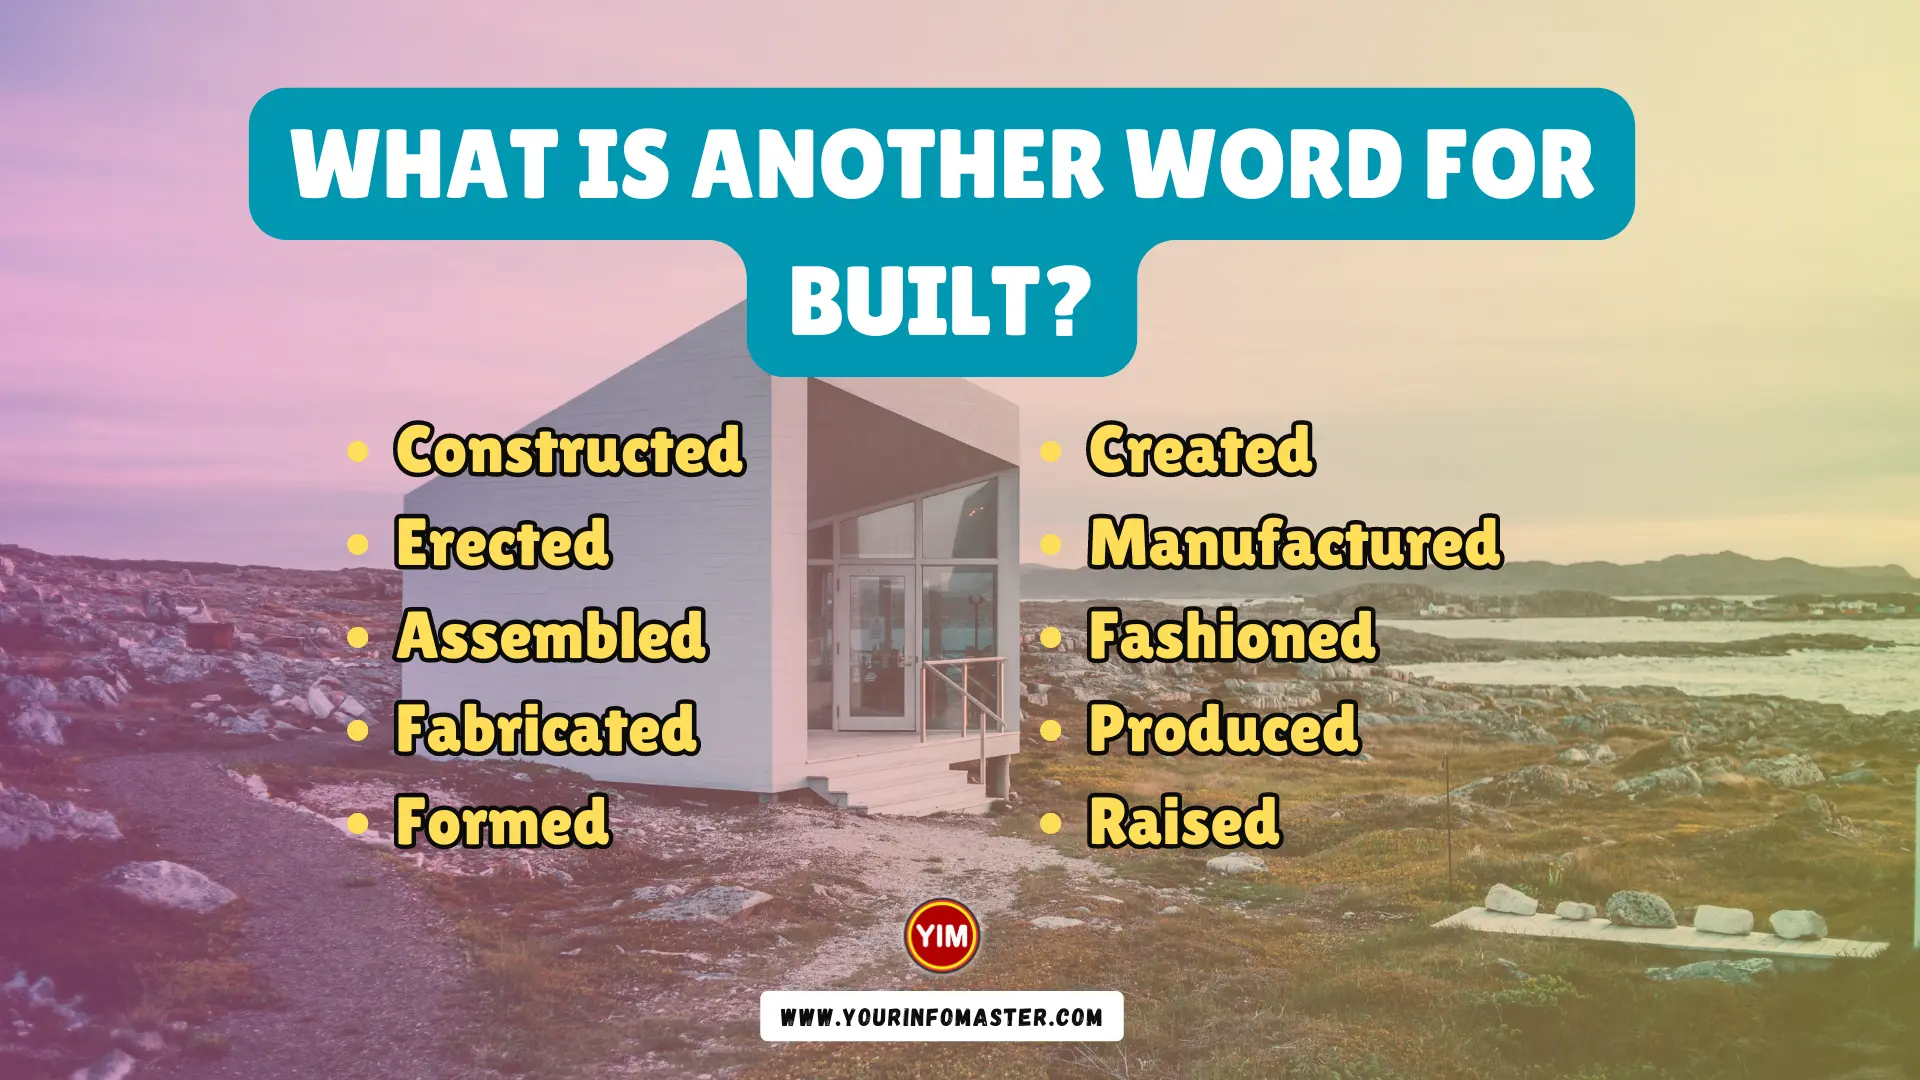 What is another word for Built